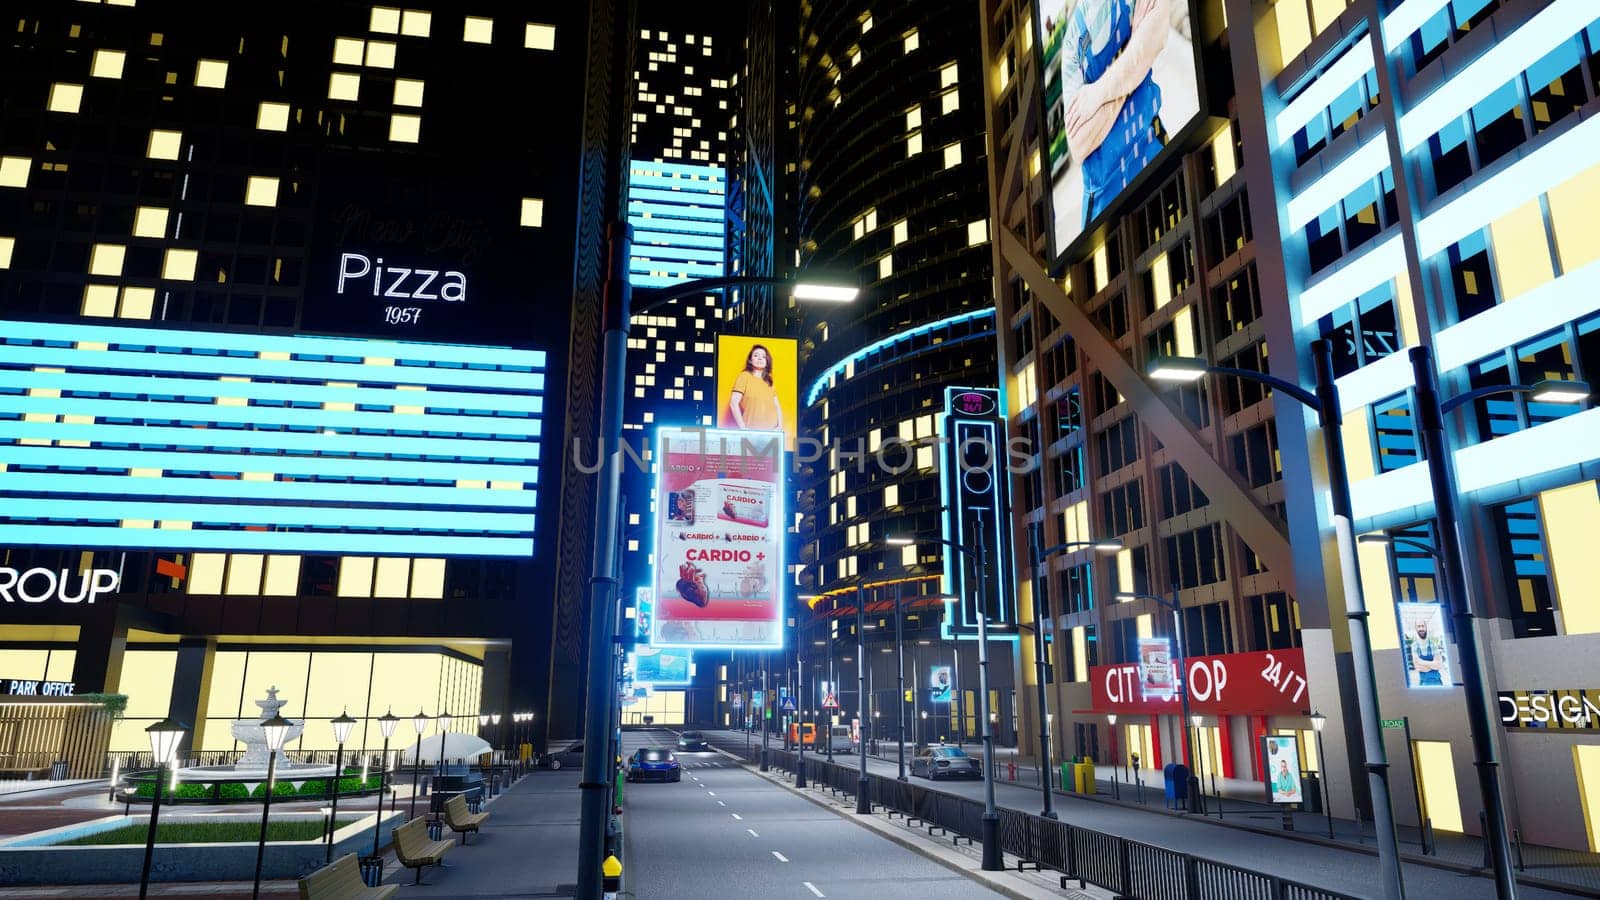 Nighttime downtown city avenues with vehicles driving past skyscrapers. Empty metropolitan town with streets illuminated by medical outdoor billboard ads and lamp posts, 3d render animation